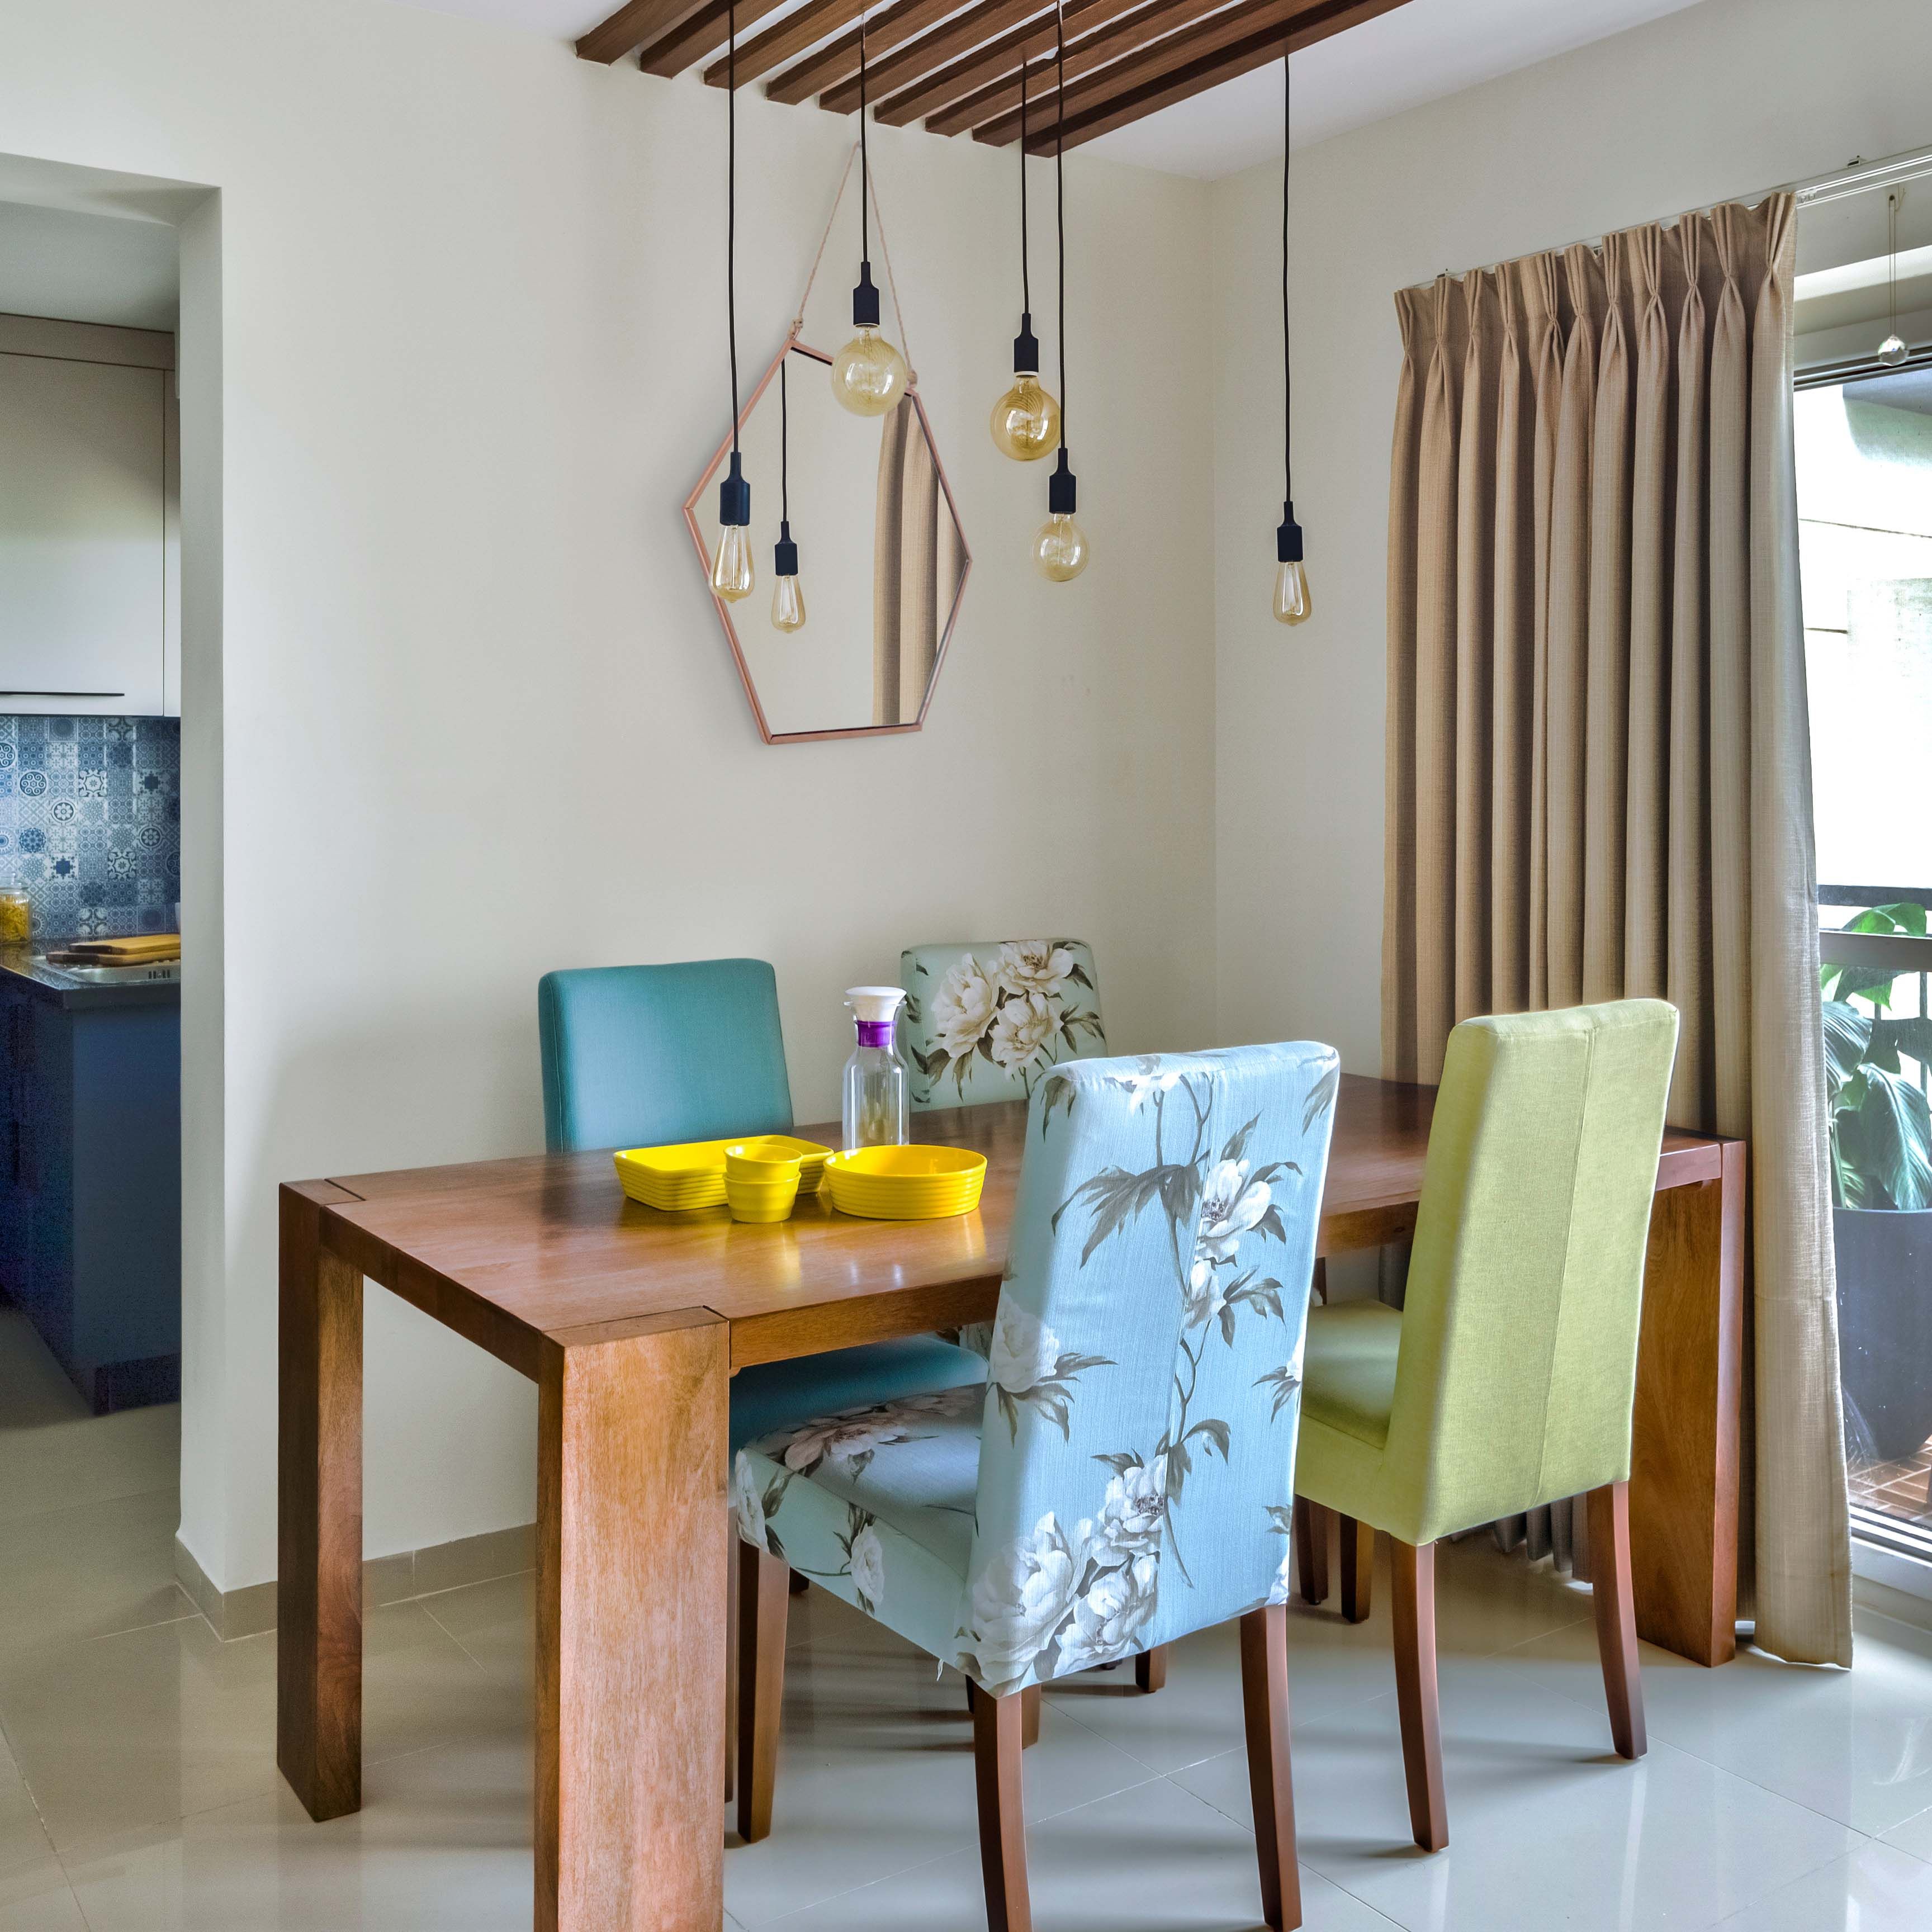 Contemporary Wooden 4-Seater Dining Room Design With Green And Blue Patterned Chairs